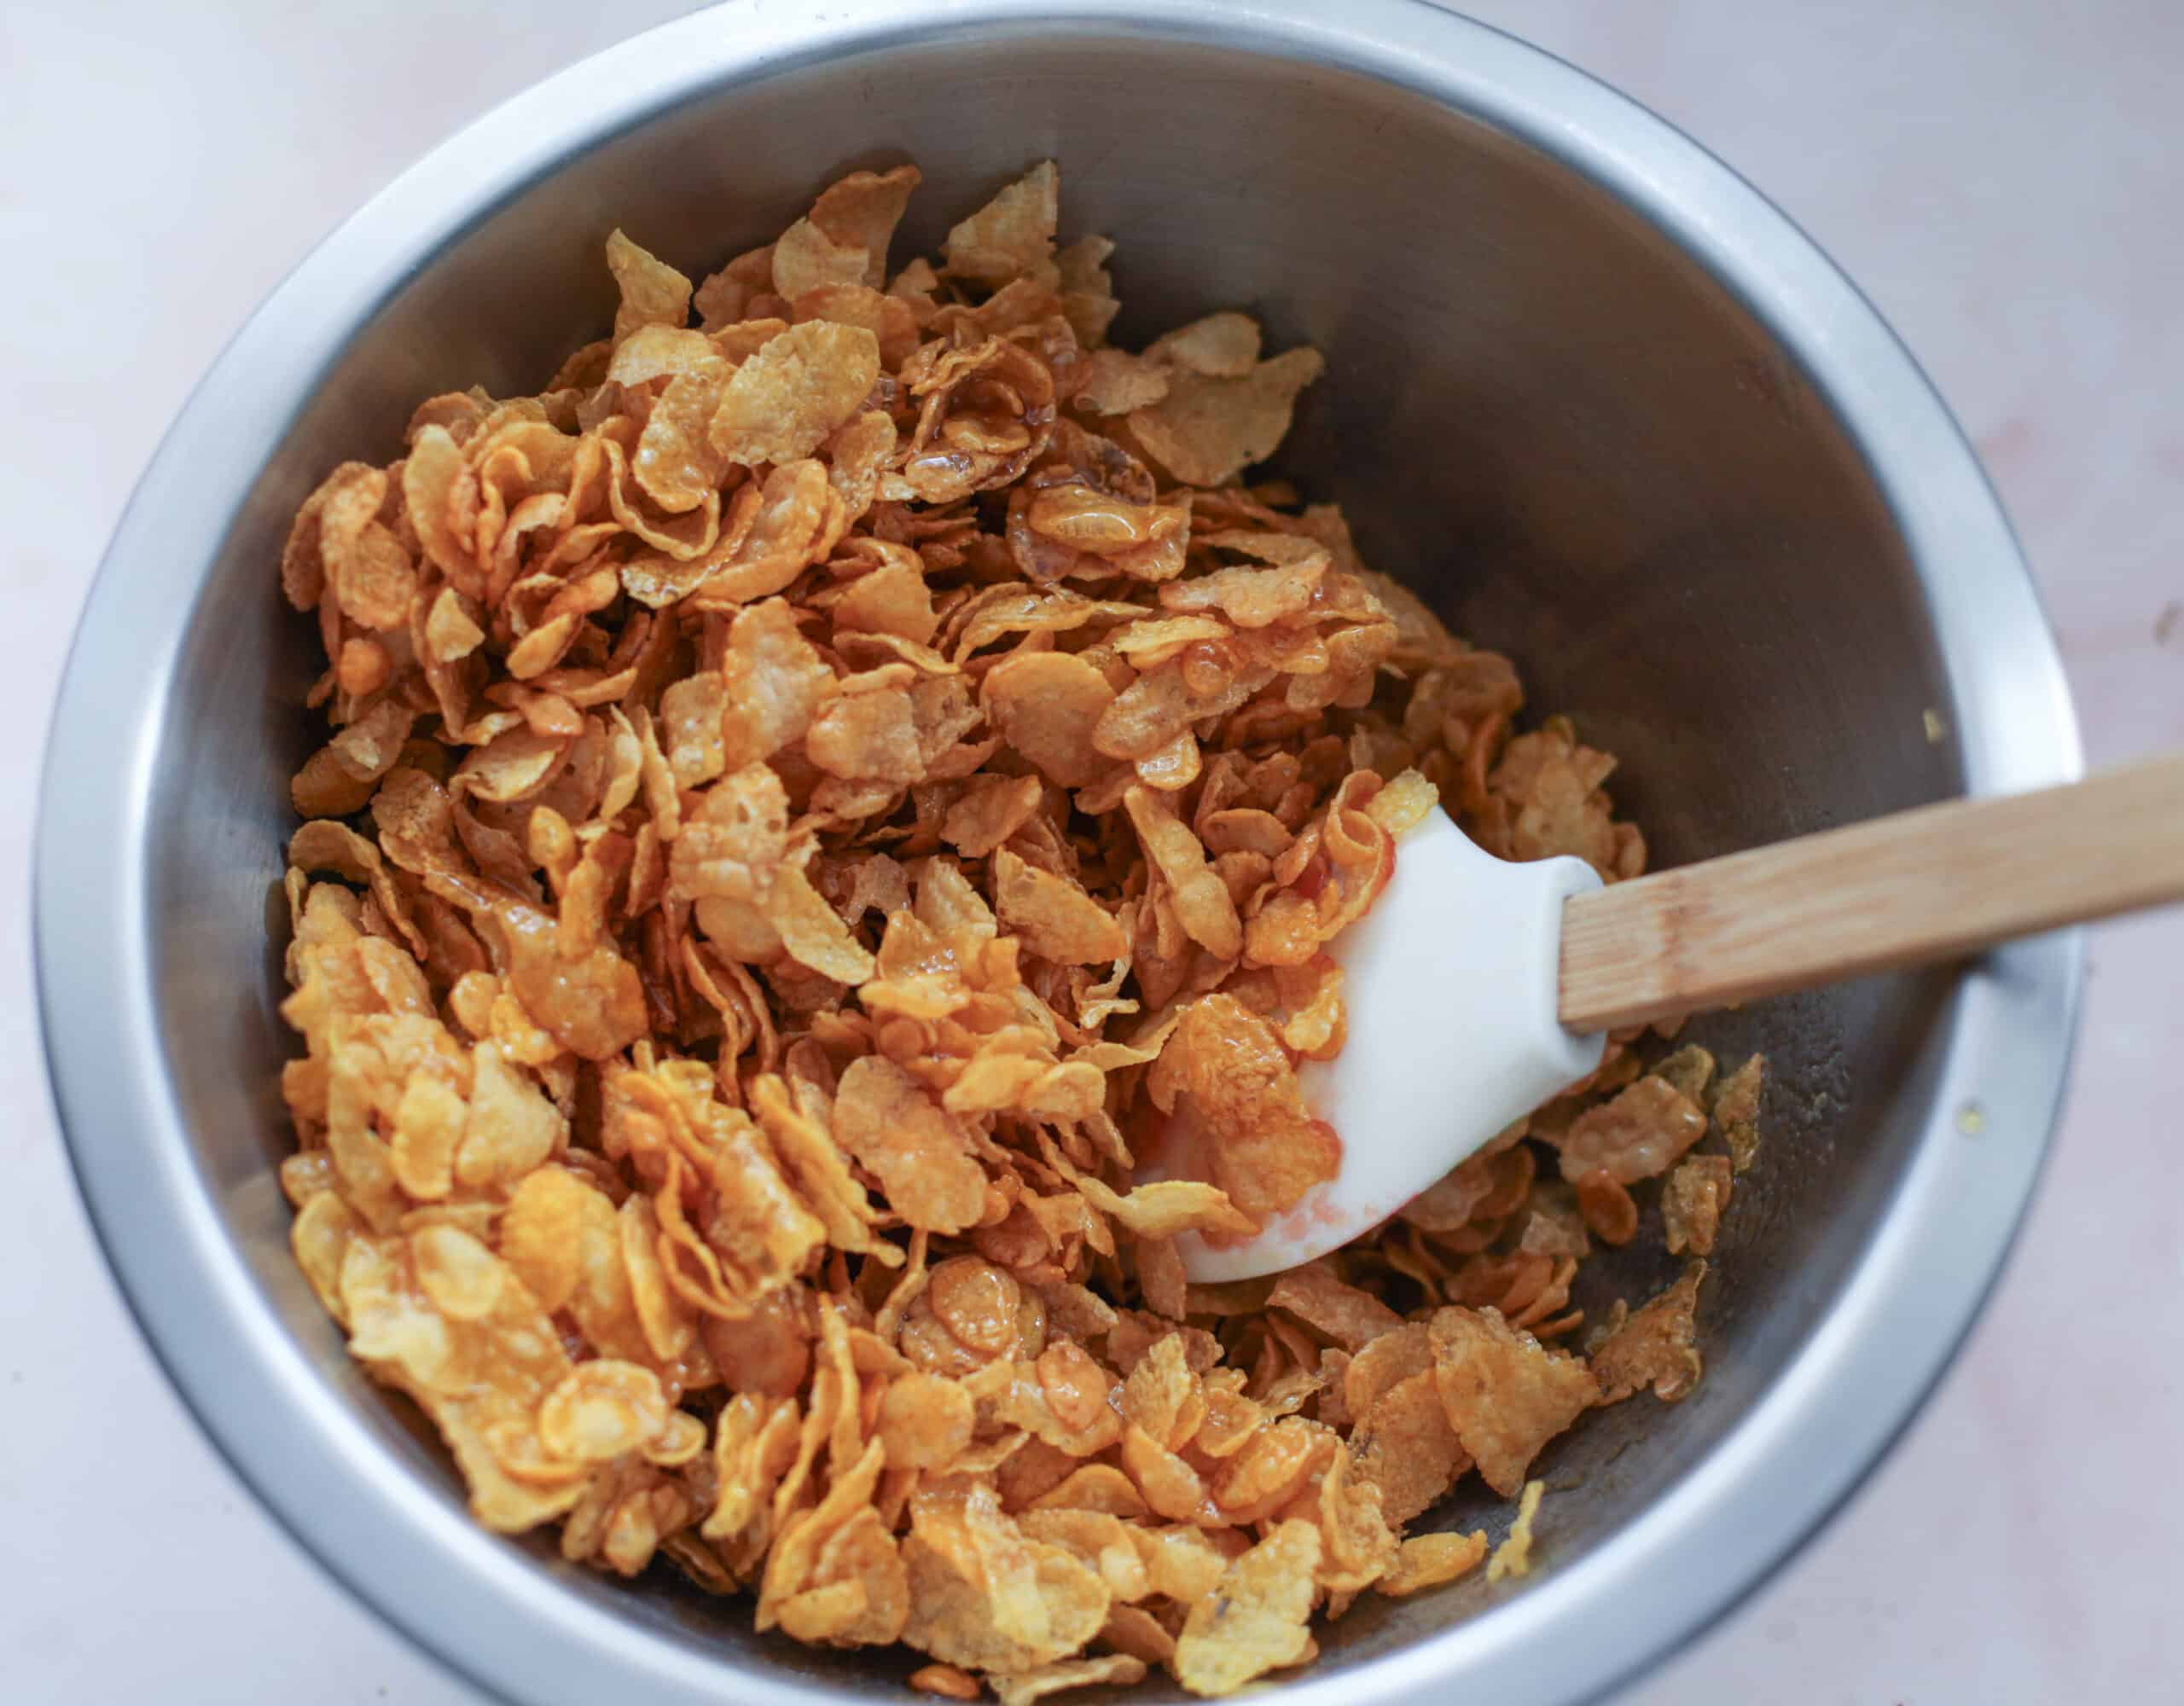 Stirring butter and golden syrup into cornflakes in a mixing bowl.